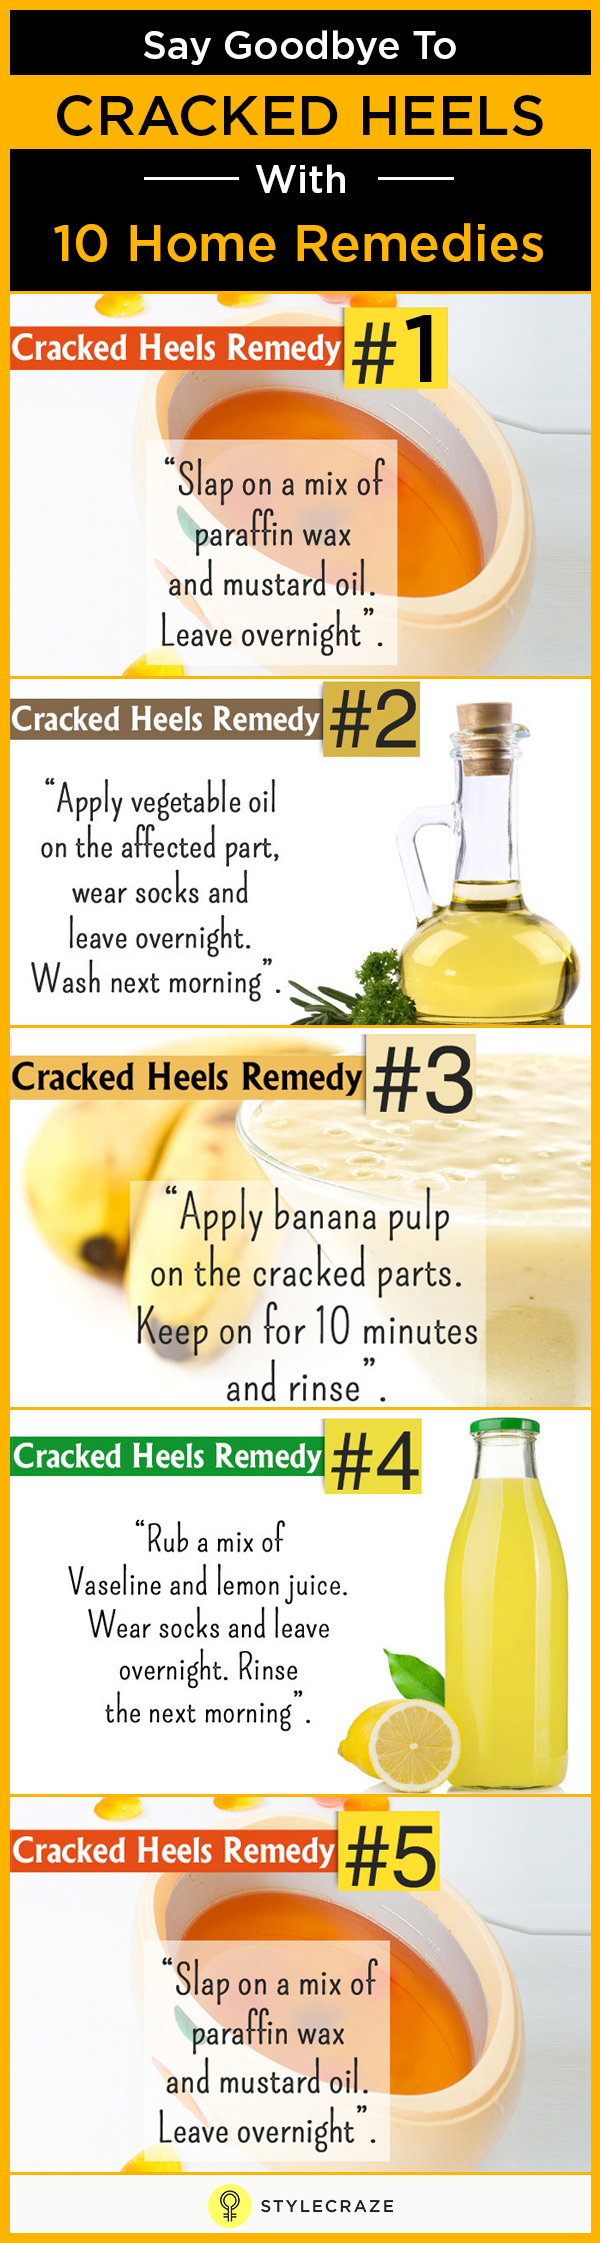 What is an effective home remedy for split nails?